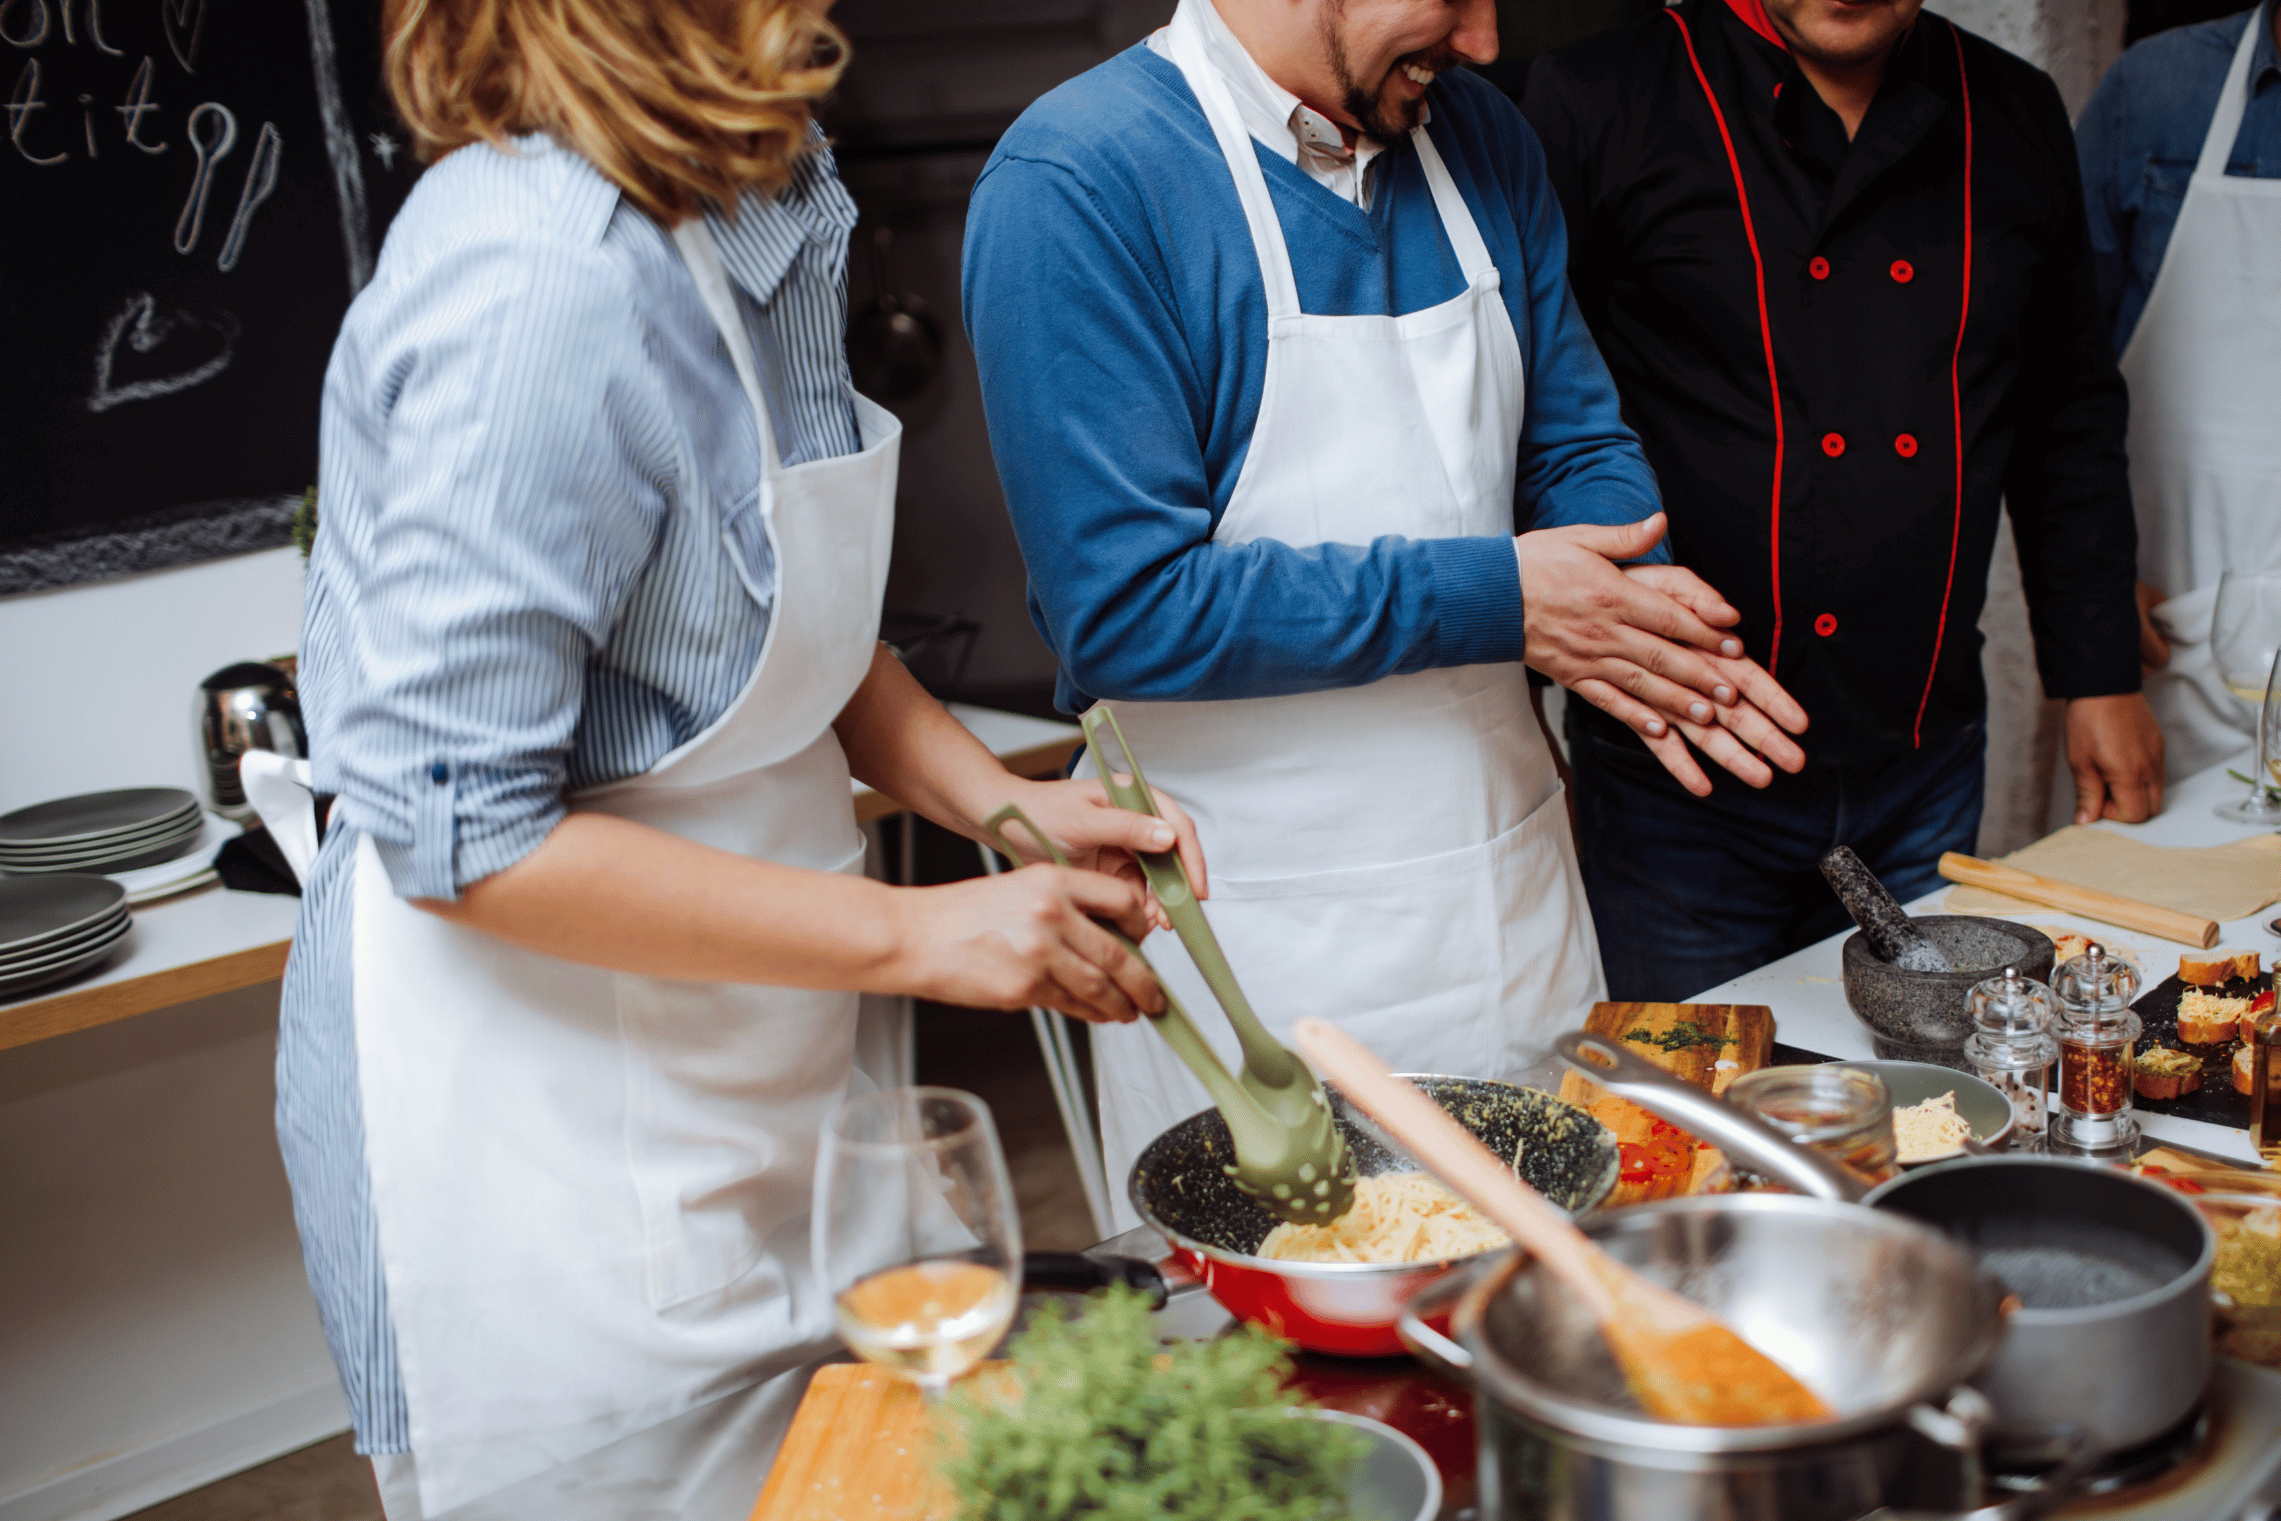 An image of a man and a woman in a cooking class